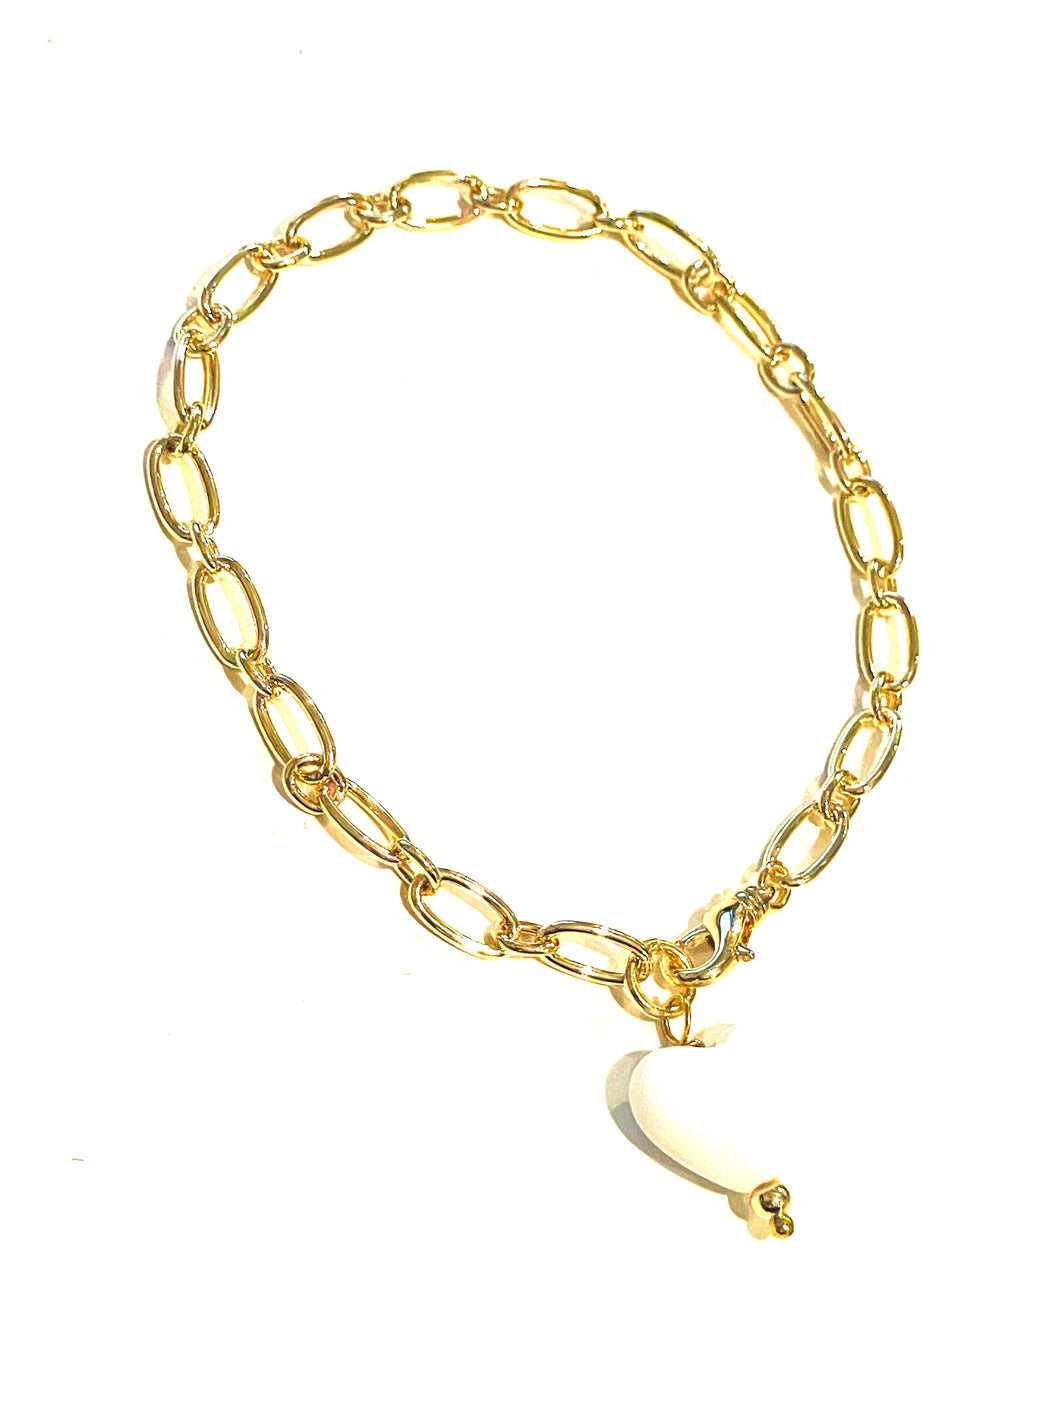 Bracelet | Gold with White Heart Charm